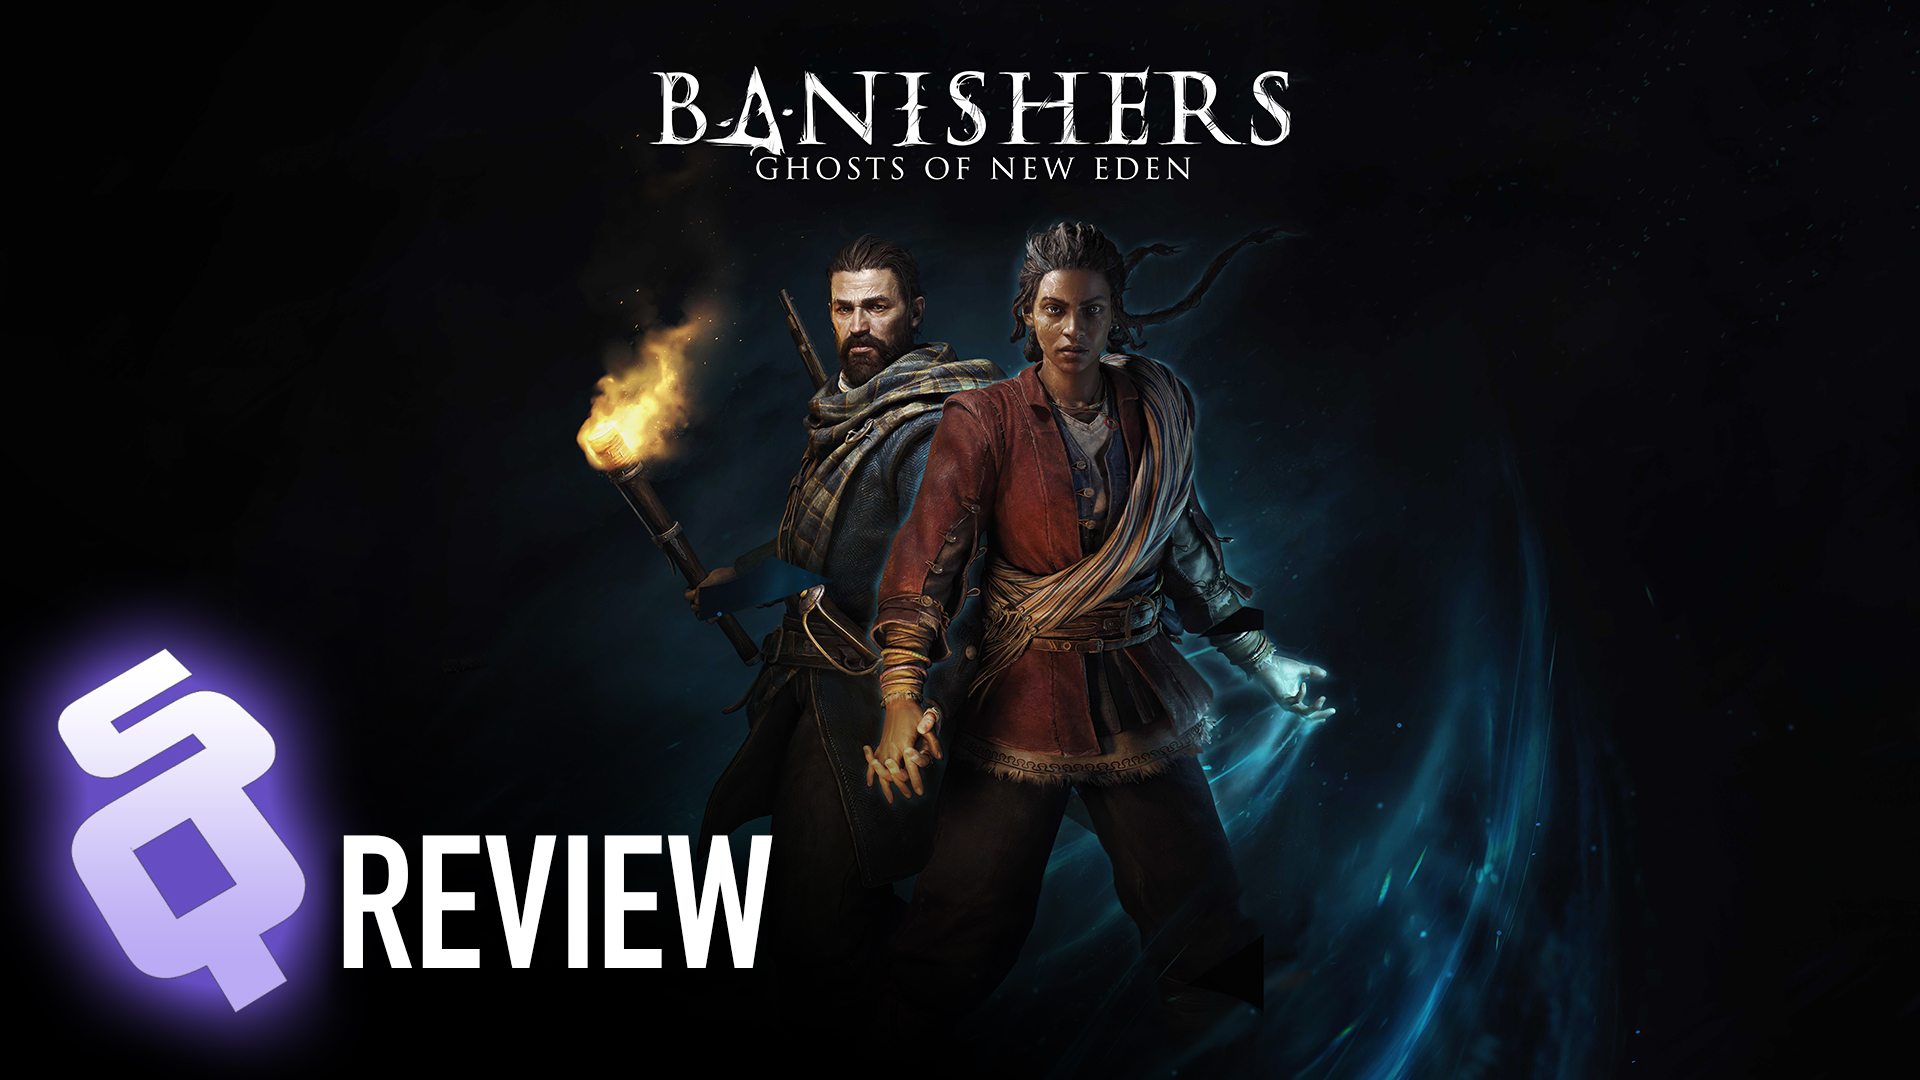 Banishers: Ghosts of New Eden review